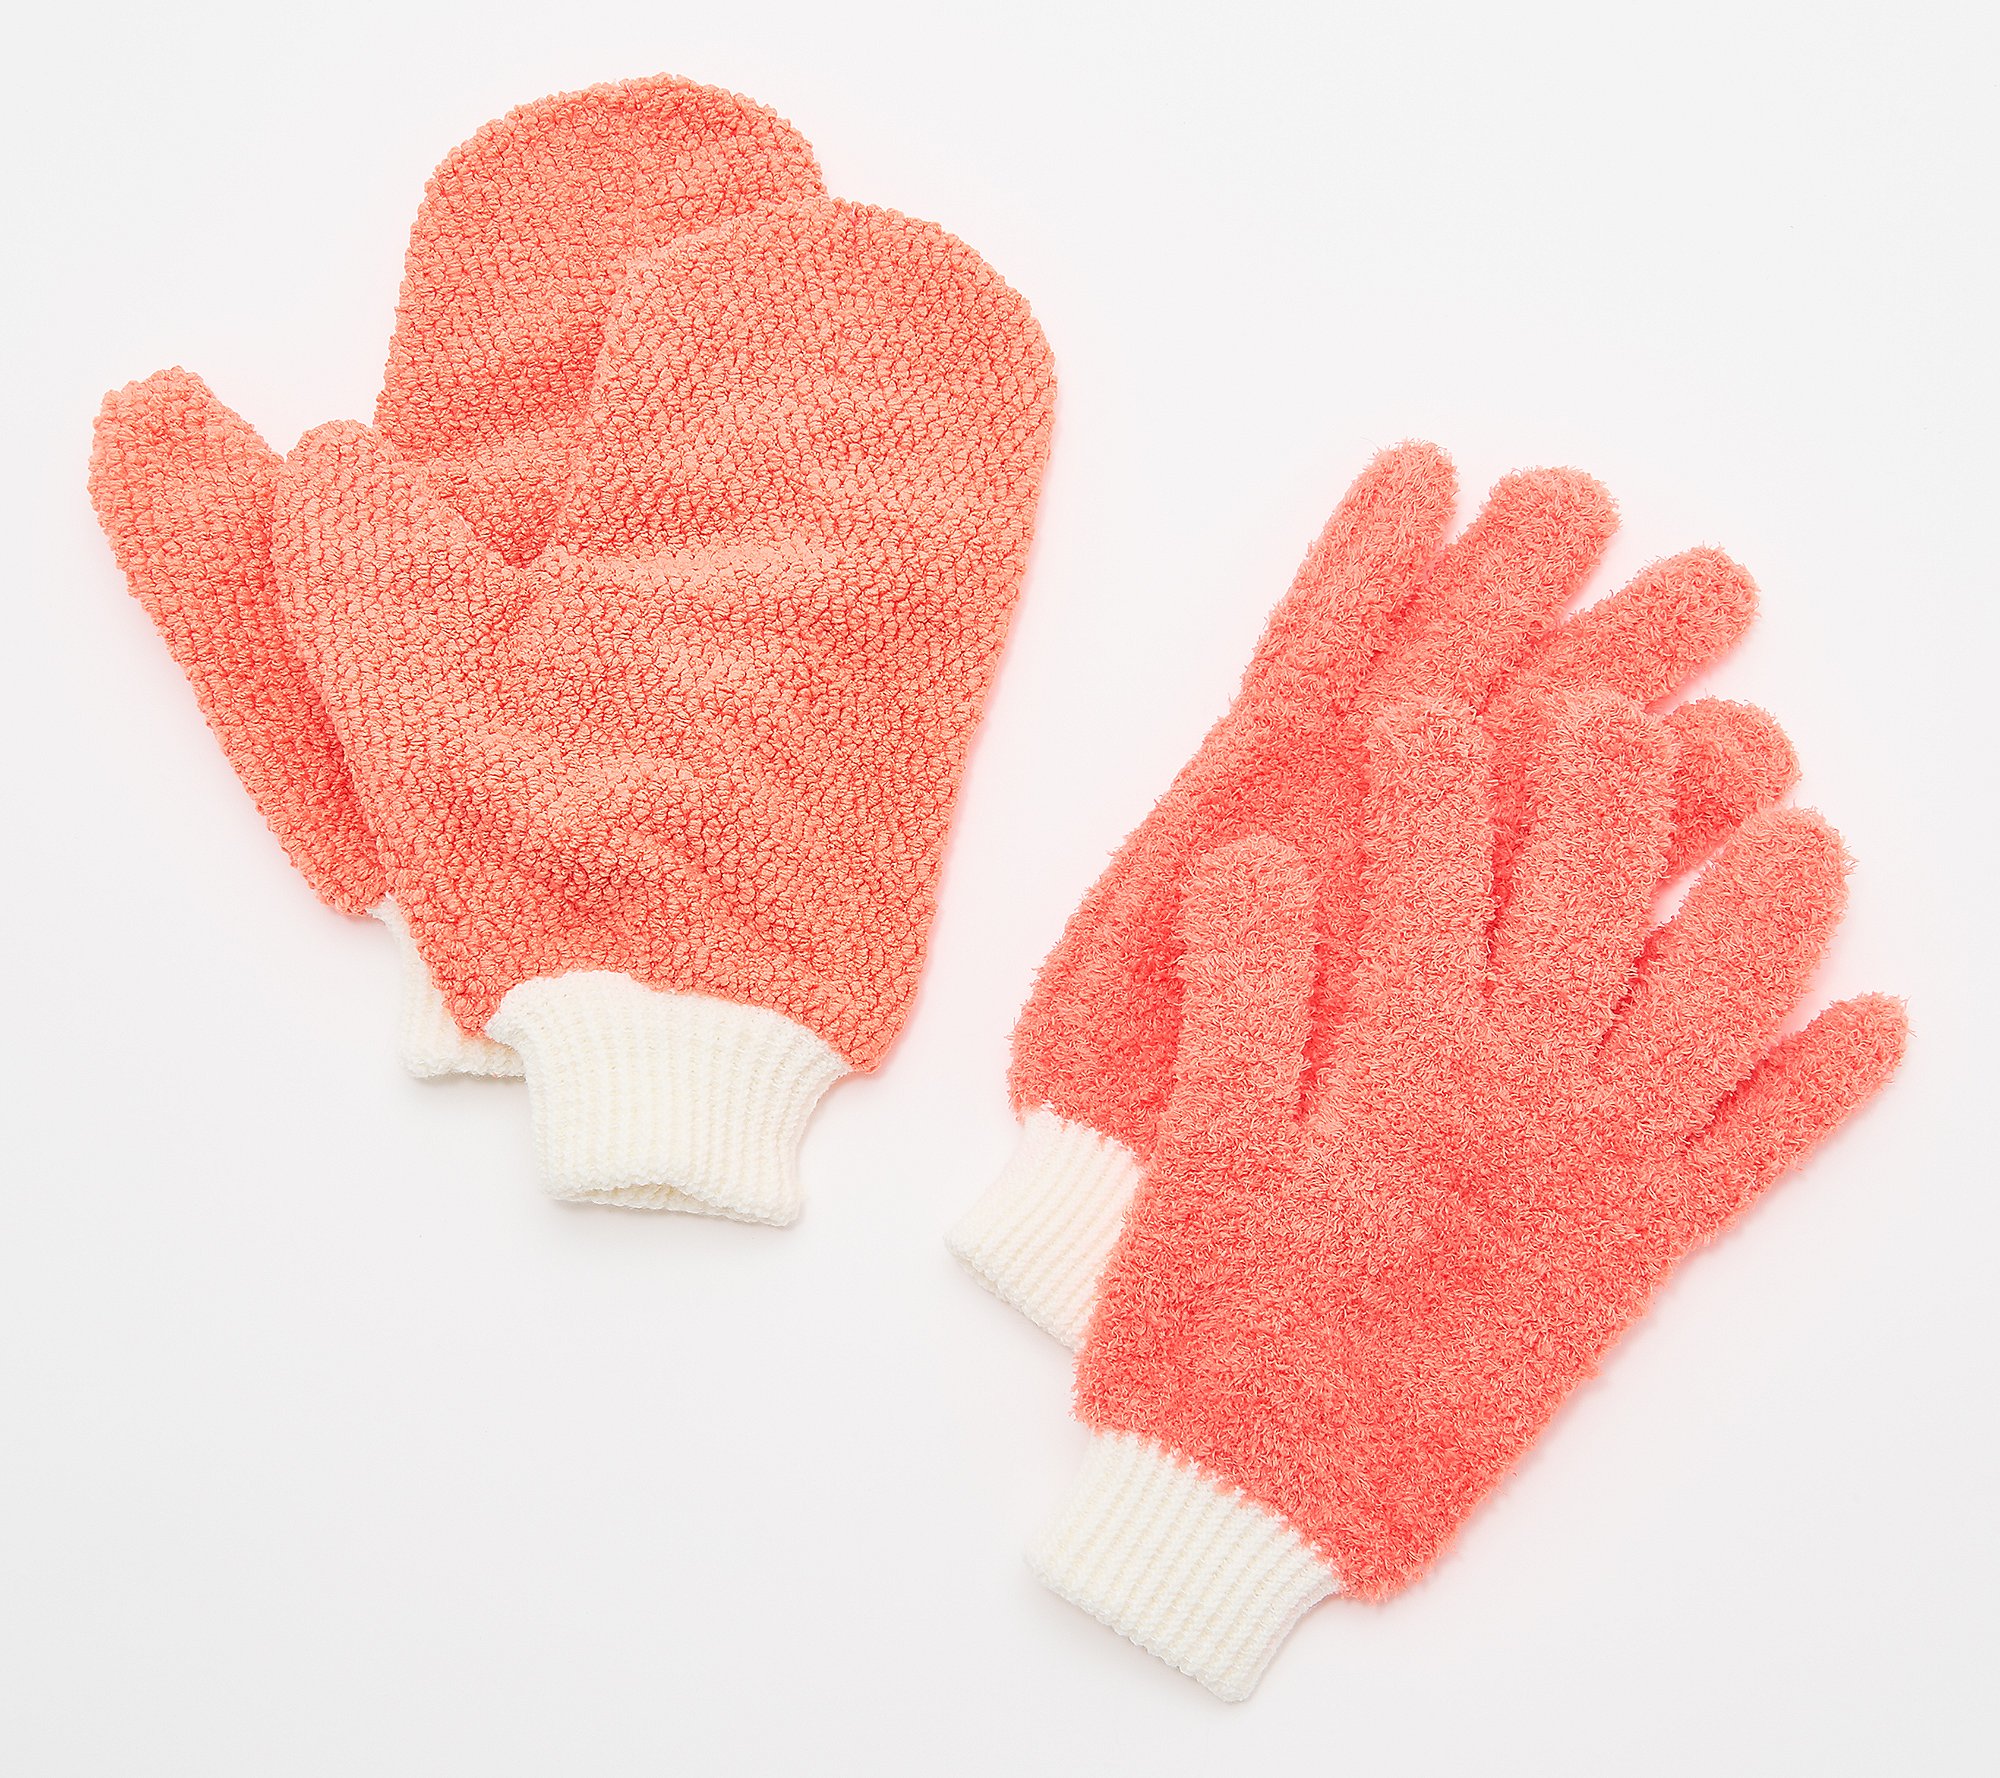 4 Piece Microfiber Dusting Gloves and Glass Cleaning Mitts 